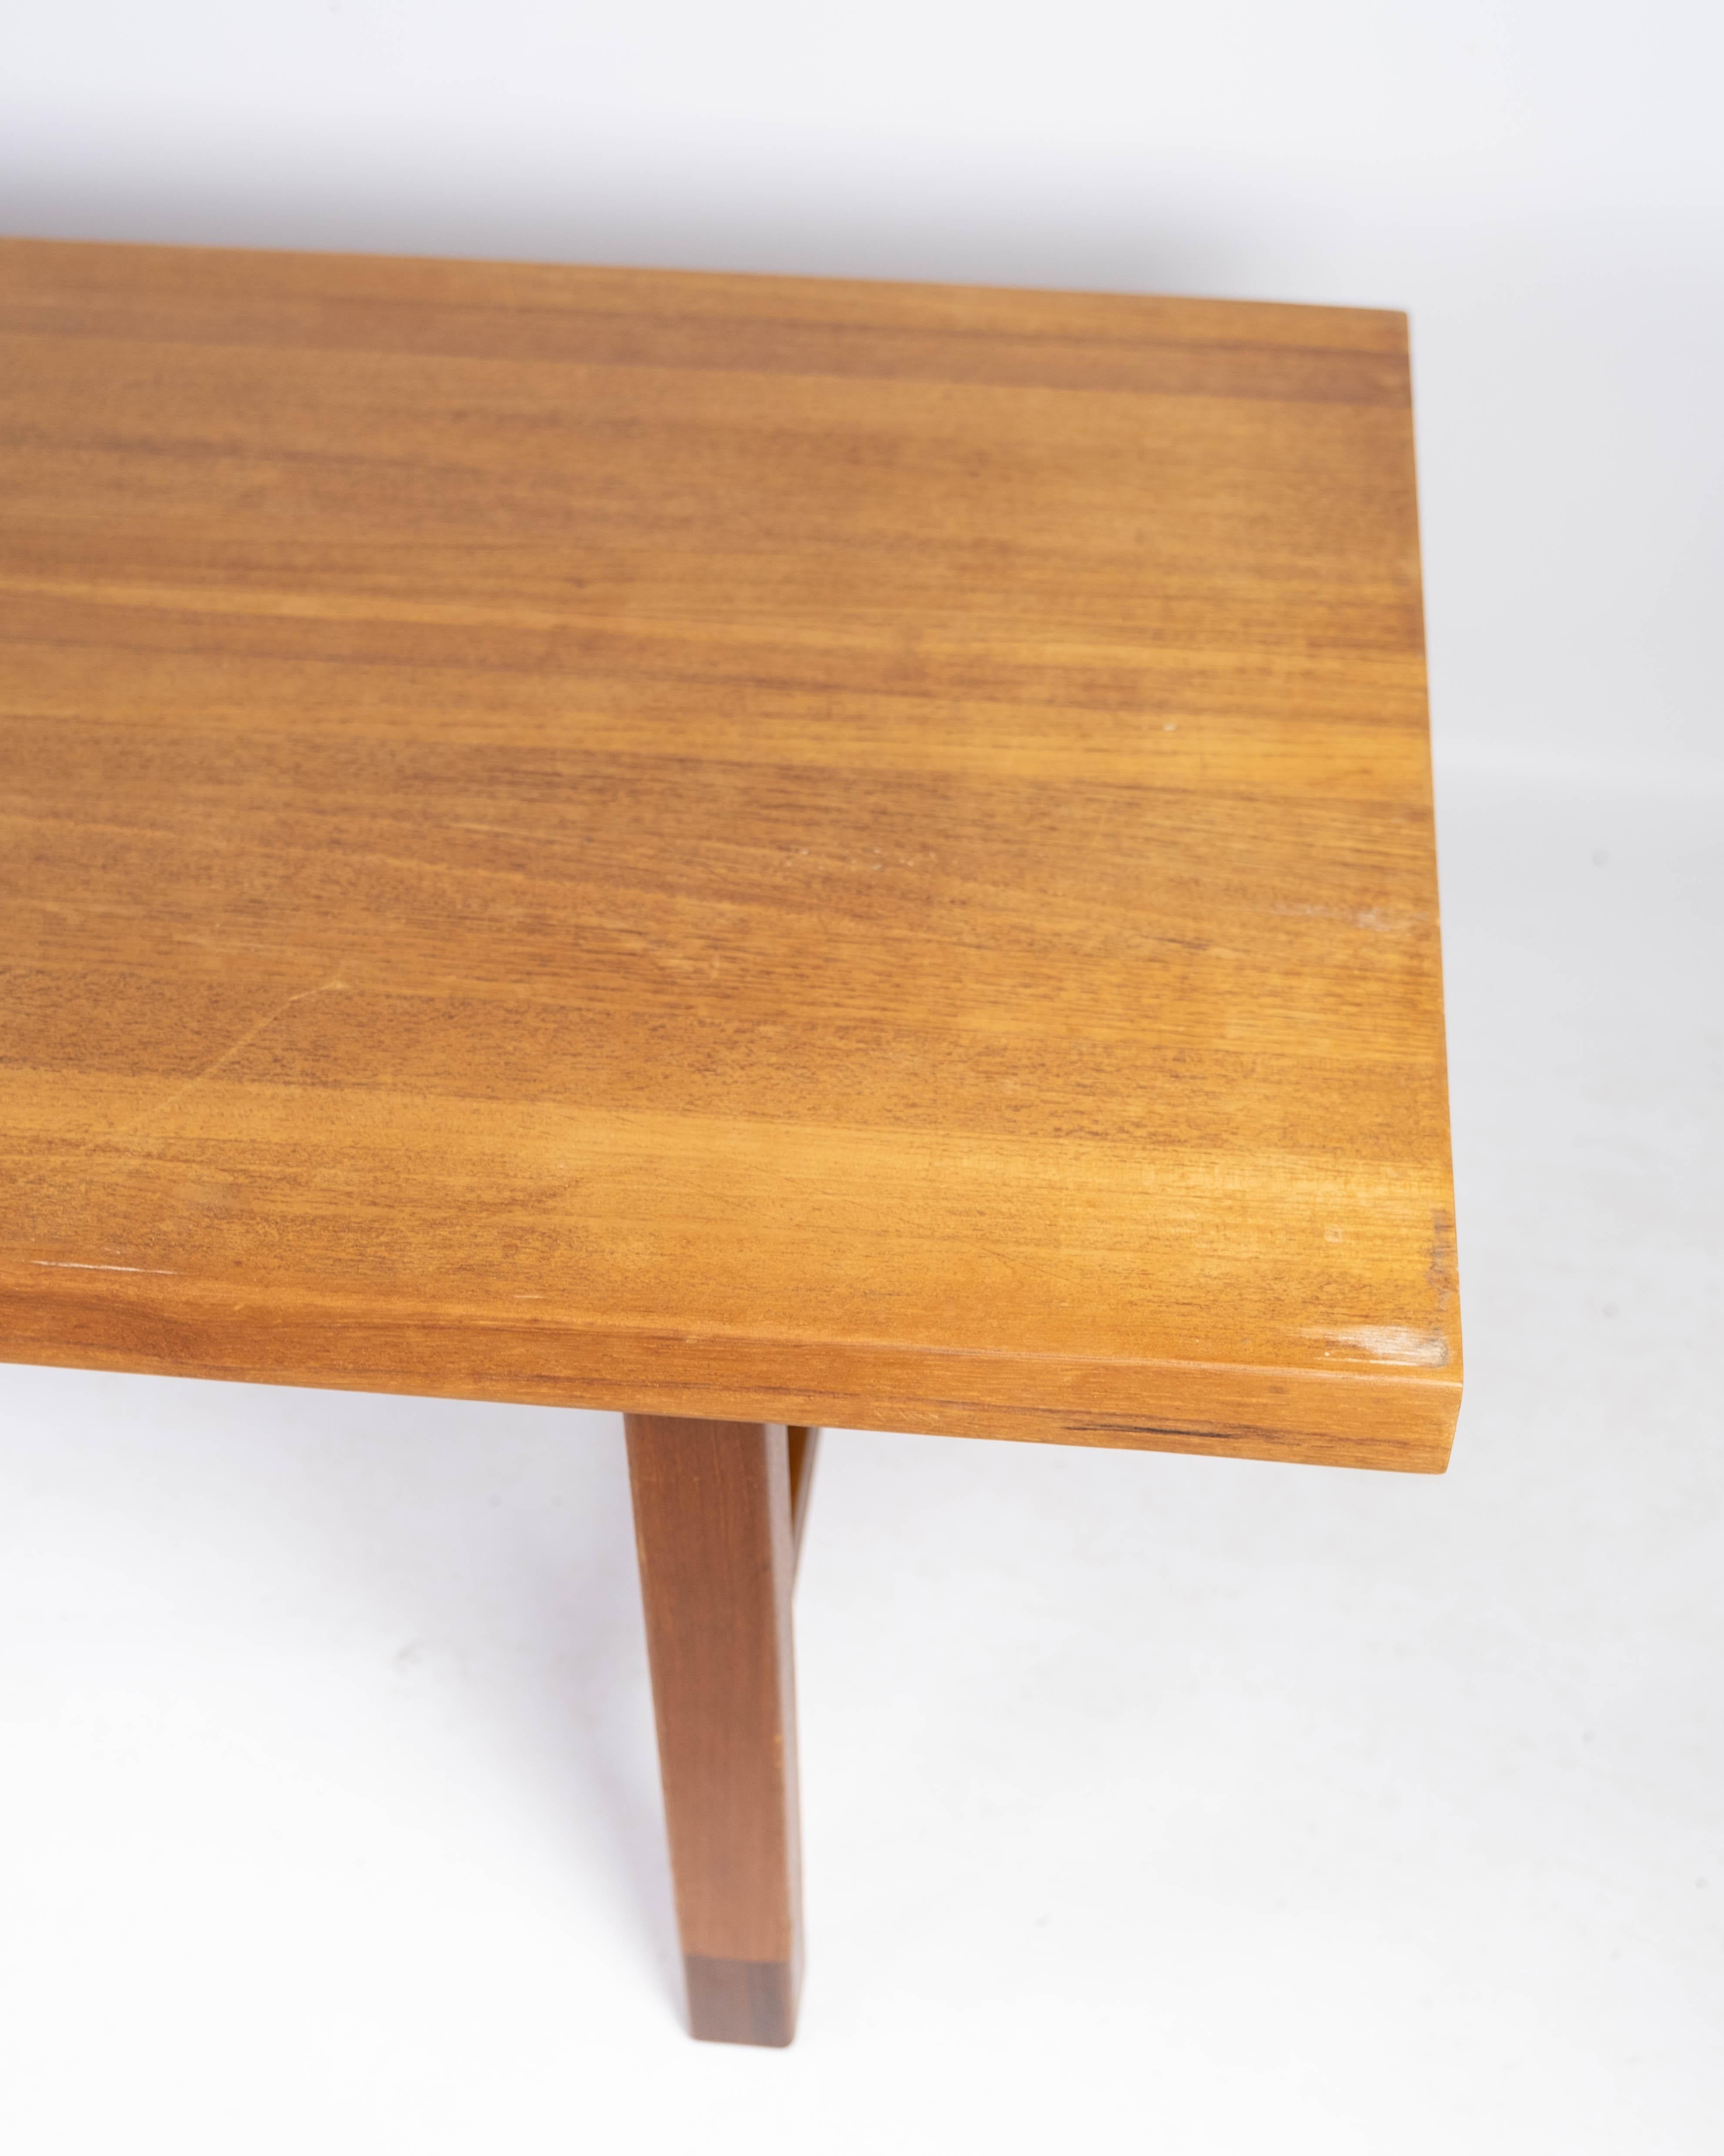 Danish Coffee Table Made In Teak By Edmund Jørgensen From 1960s For Sale